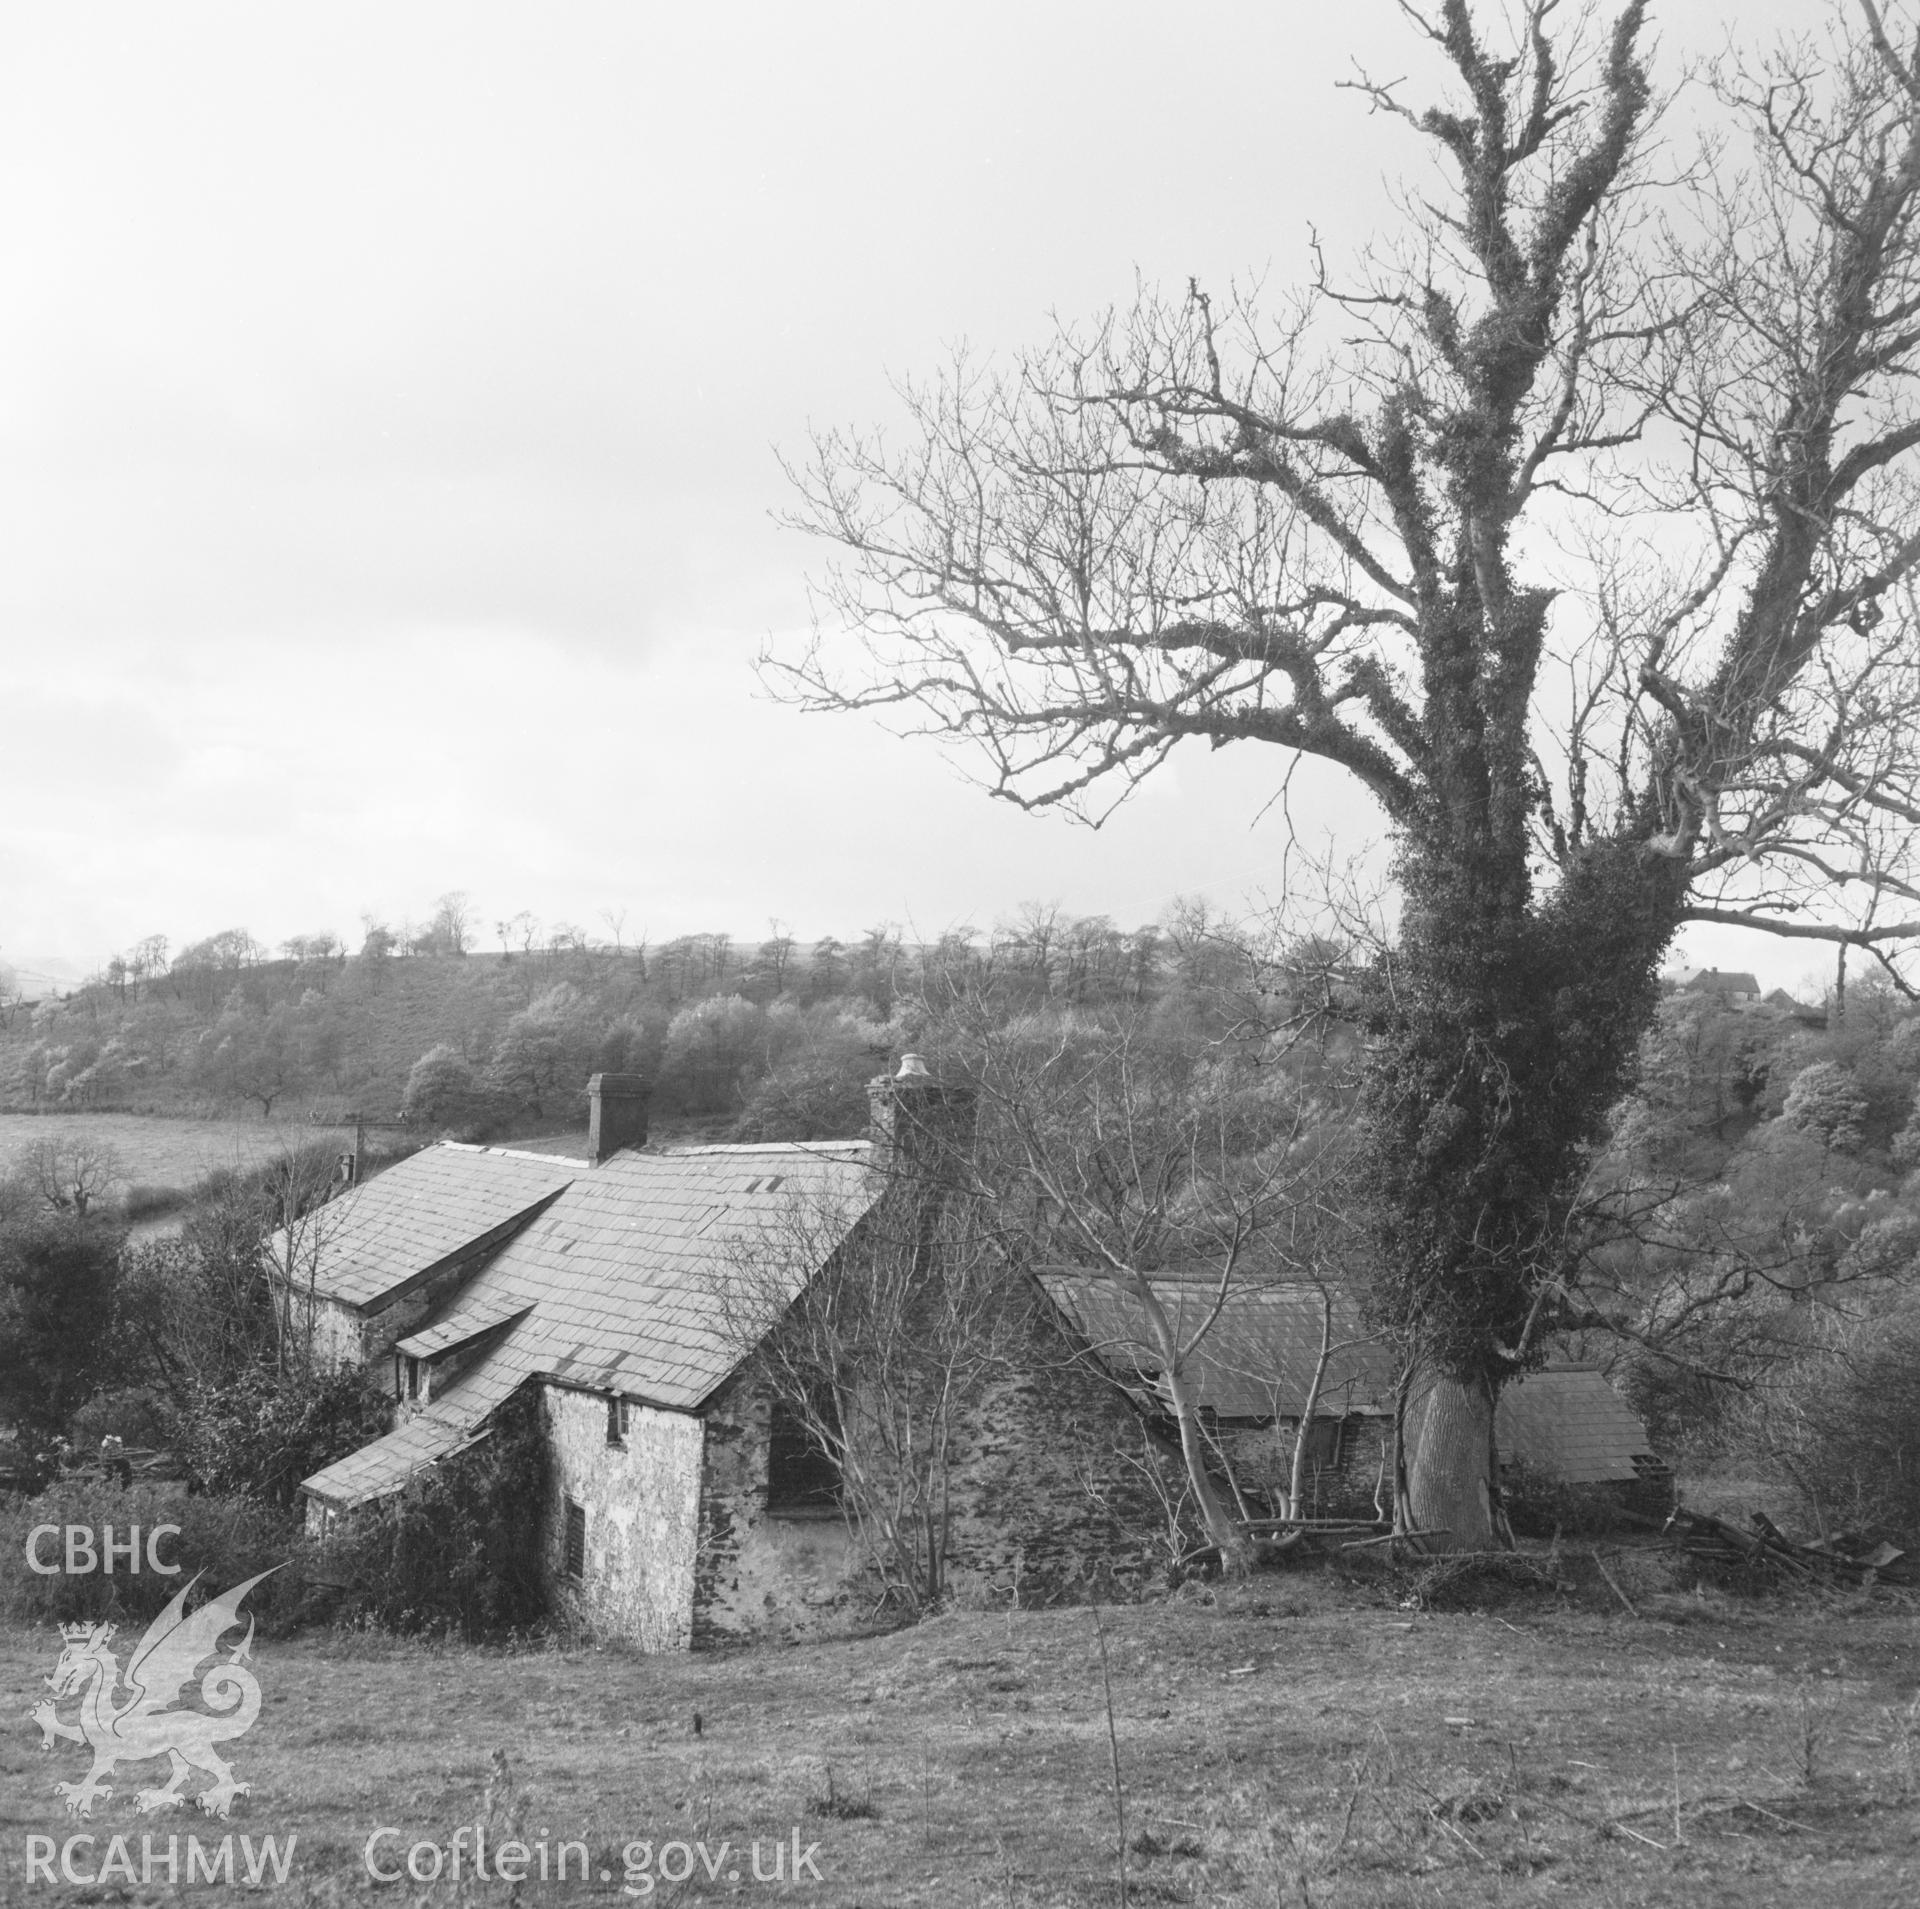 Digital copy of a black and white negative showing Ty'n y Waun, Bettws, taken 17th November 1966.